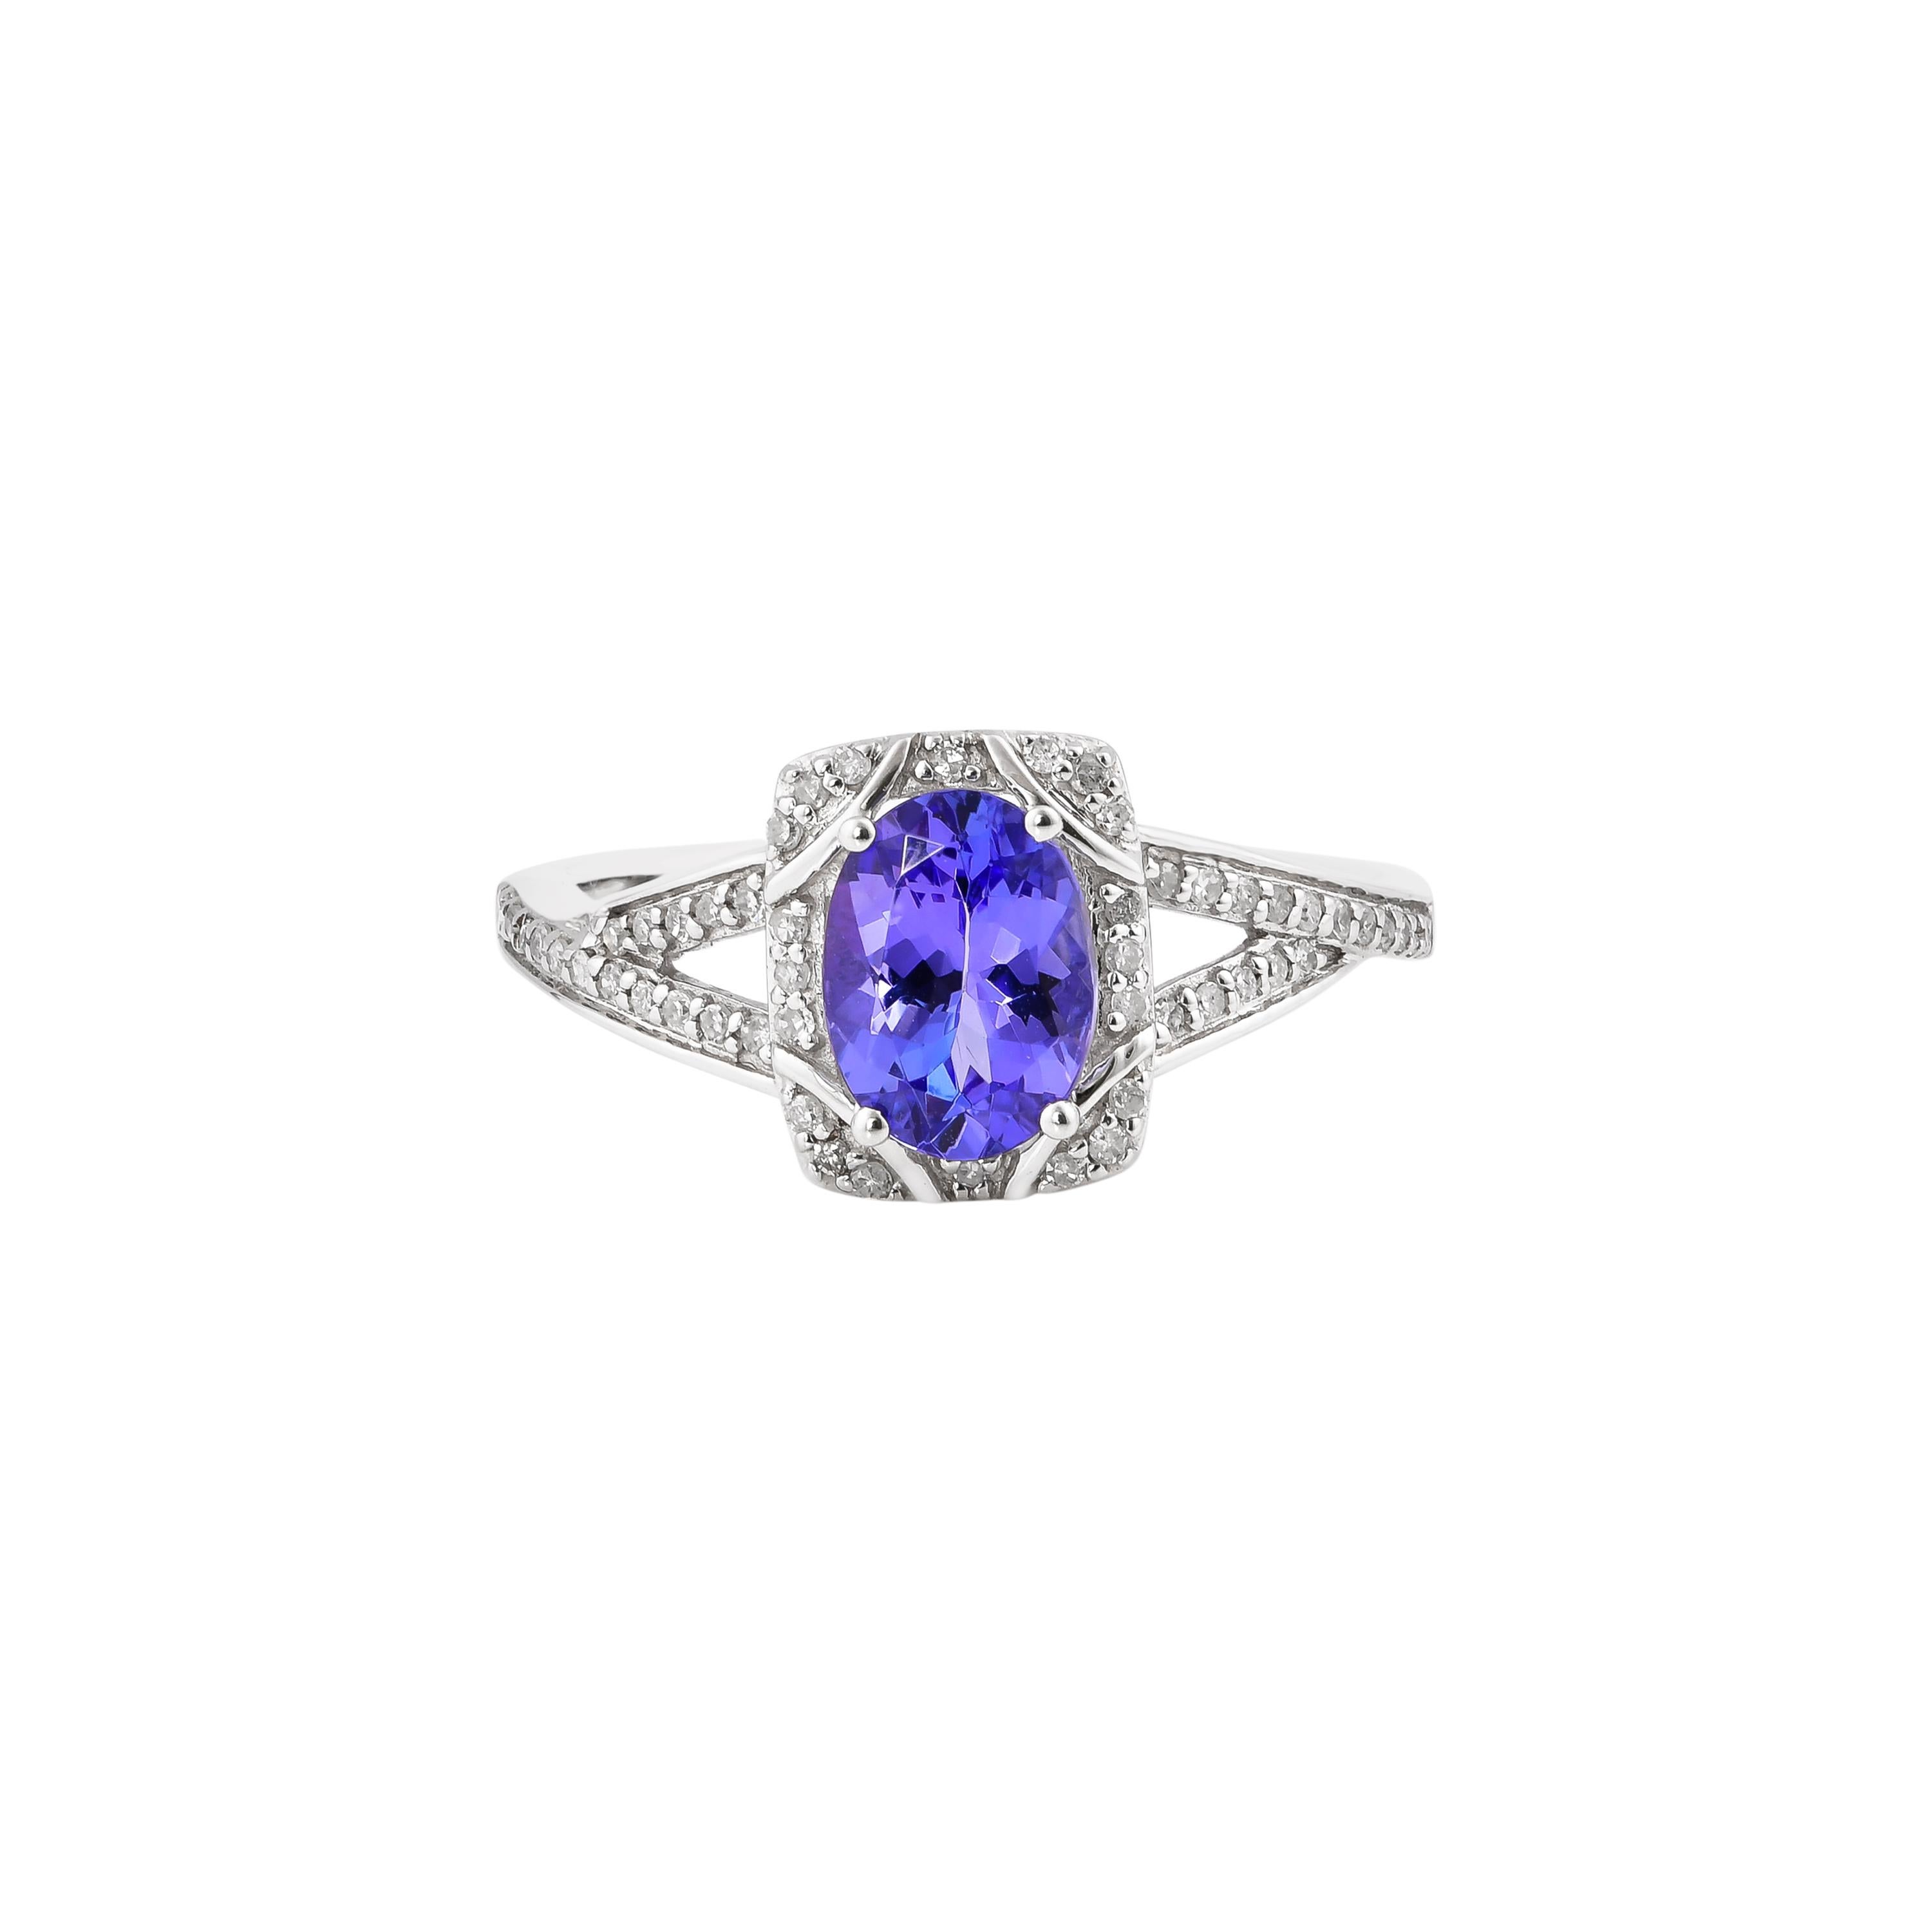 Contemporary 1.190 Carat Tanzanite Ring in 10 Karat White Gold with Diamond. For Sale